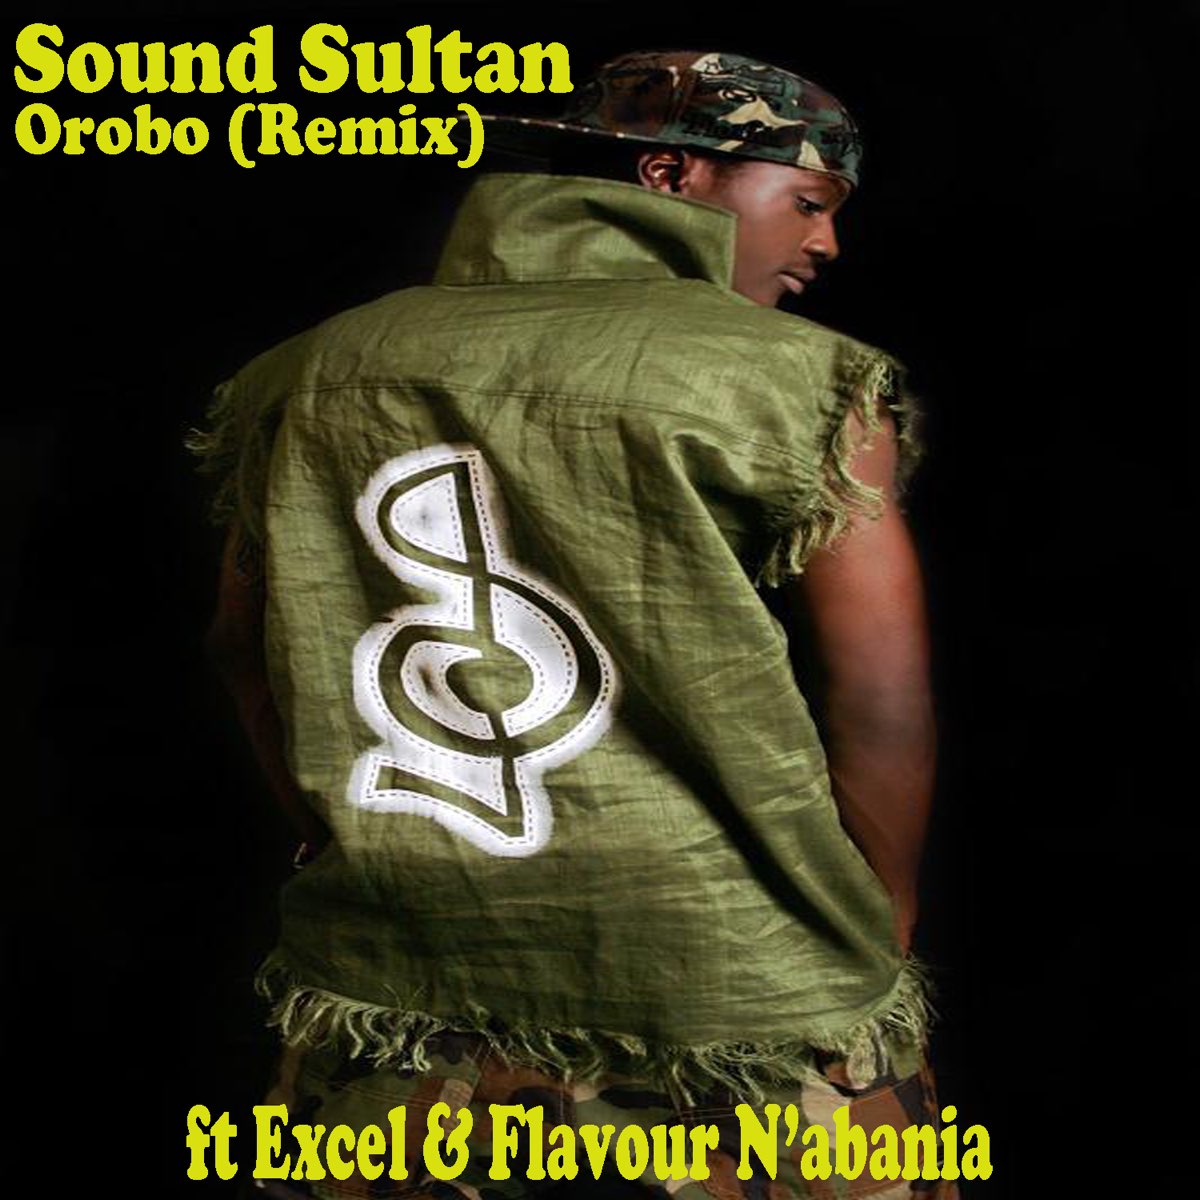 Orobo (feat. Flavour N'abania) - Single by Sound Sultan on Apple Music